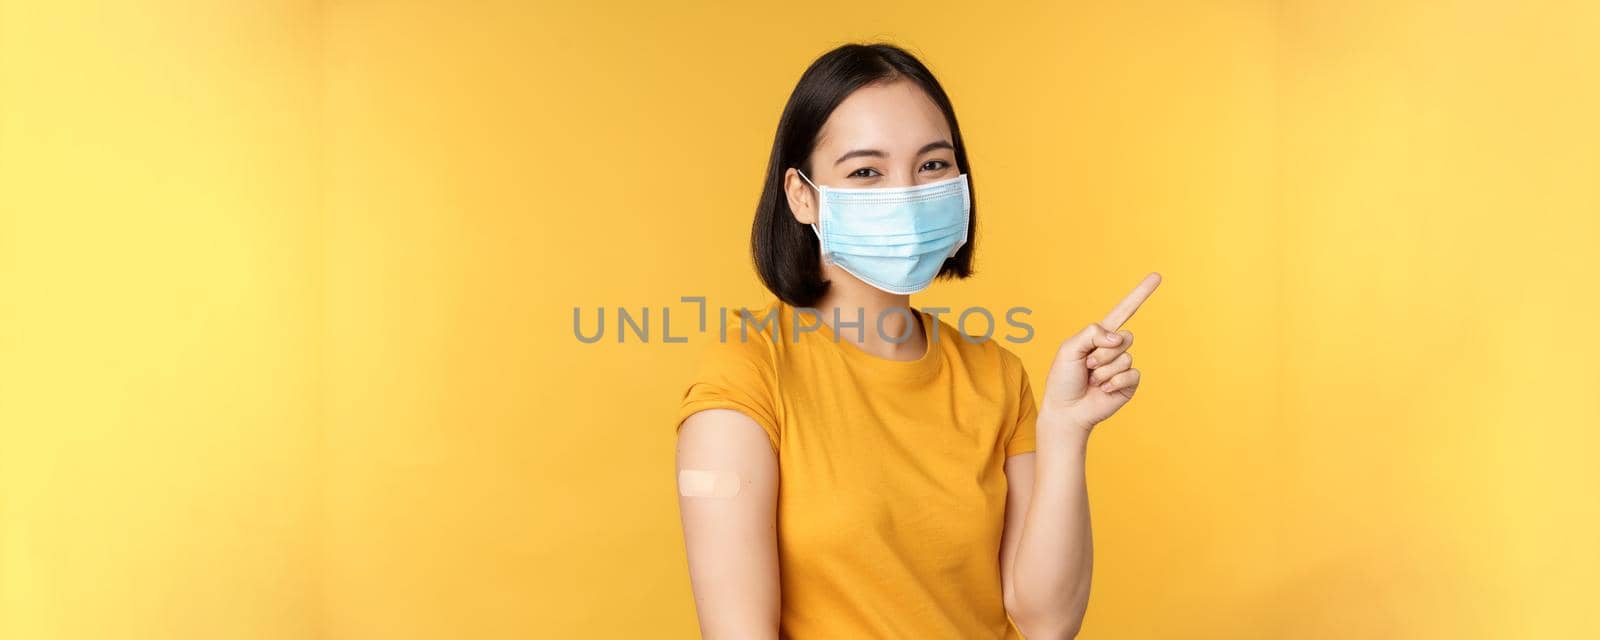 Vaccination from covid and health concept. Image of smiling korean girl in medical face mask, band aid on shoulder, pointing finger at banner advertisement, yellow background.